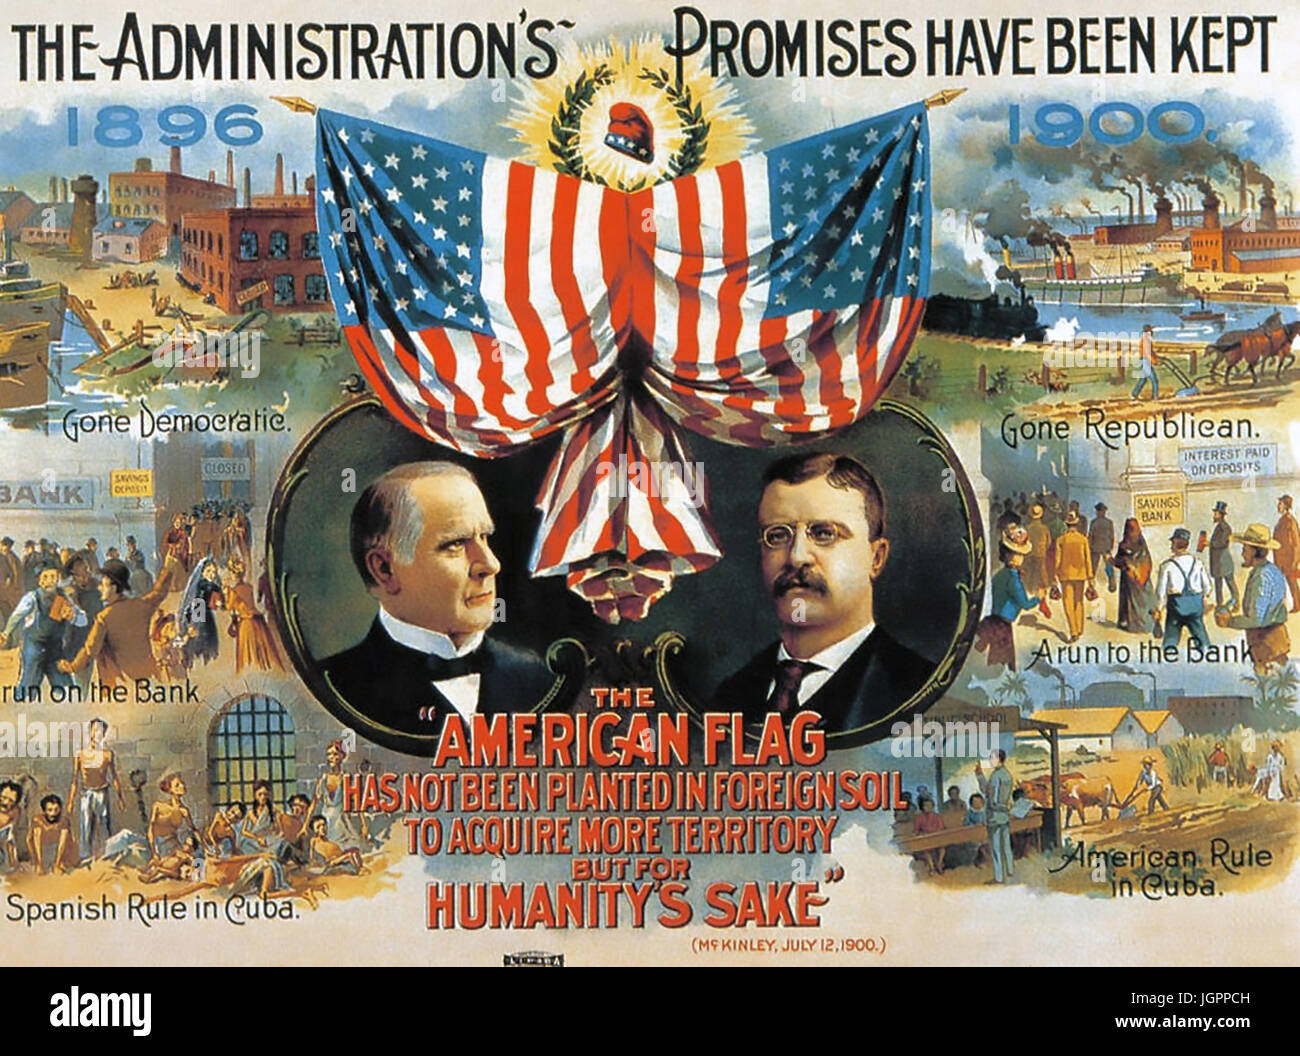 AMERICAN 1900 PRESIDENTIAL ELECTIONS Republican poster with President William McKinley at left and his Vice Presidential candidate Theodore Roosevelt. The side images contrast the effects of Democratic and Republican administrations. Stock Photo